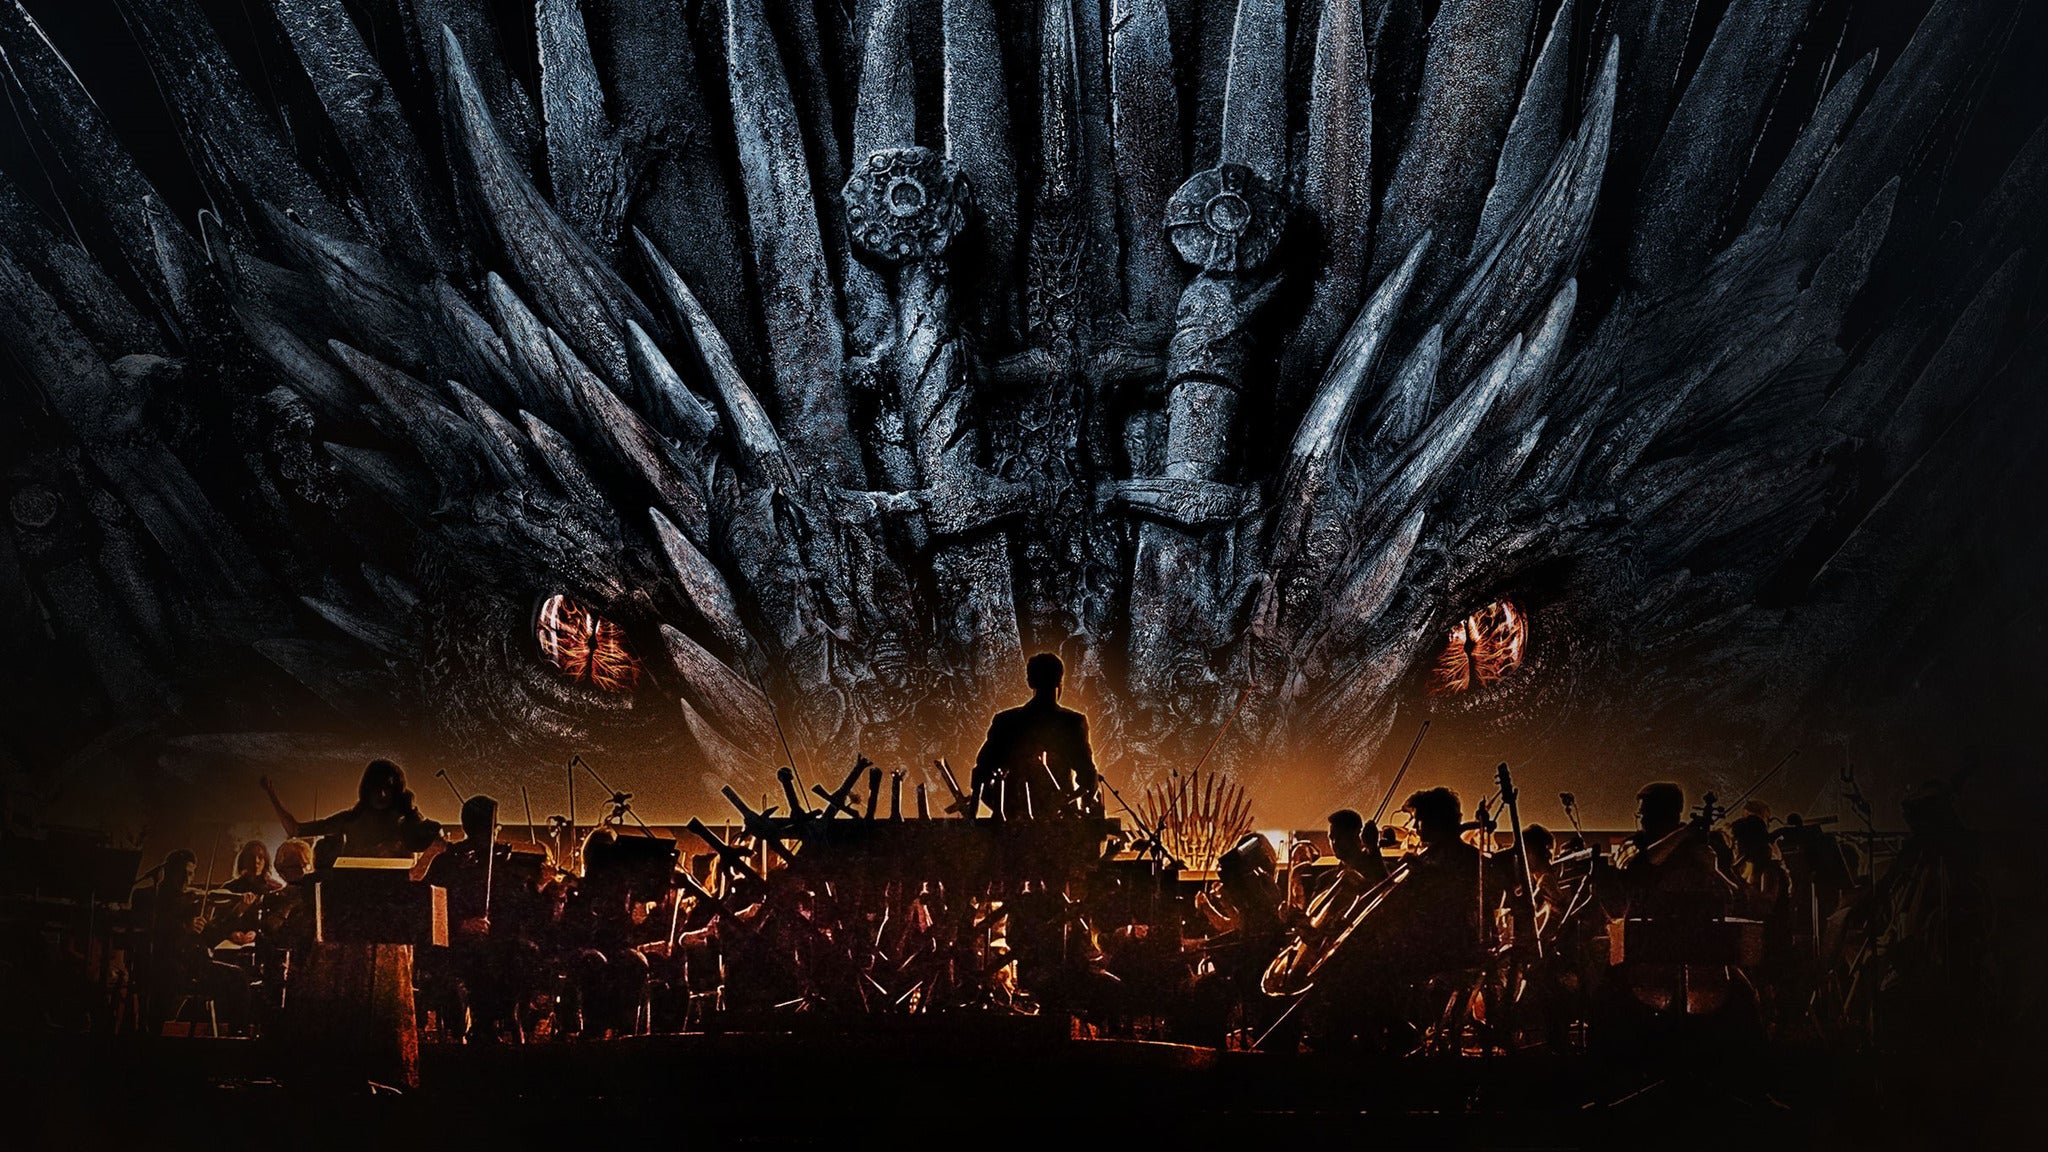 Game Of Thrones Live Concert Experience - Music By Ramin Djawadi in Raleigh promo photo for Citi® Cardmember Preferred presale offer code